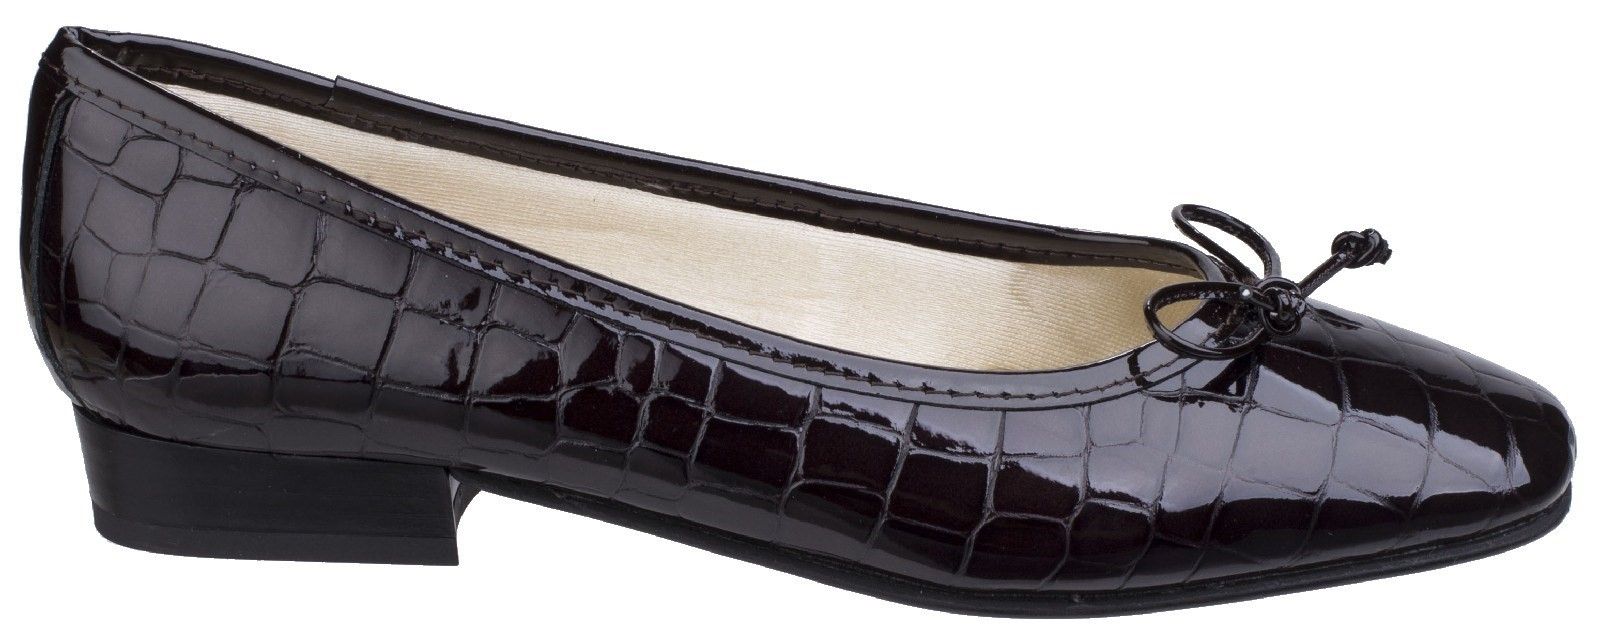 Riva brings in a twist to the traditional ballet with this elegant snake print court shoe.  A square toe gives a dynamic feel to your day-wear. Luxury patent leather upper with snake print. 
Gently padded soft textile lining. 
Smooth leather rim with leather bow. 
Cushioned leather footbed. 
Square front toe.